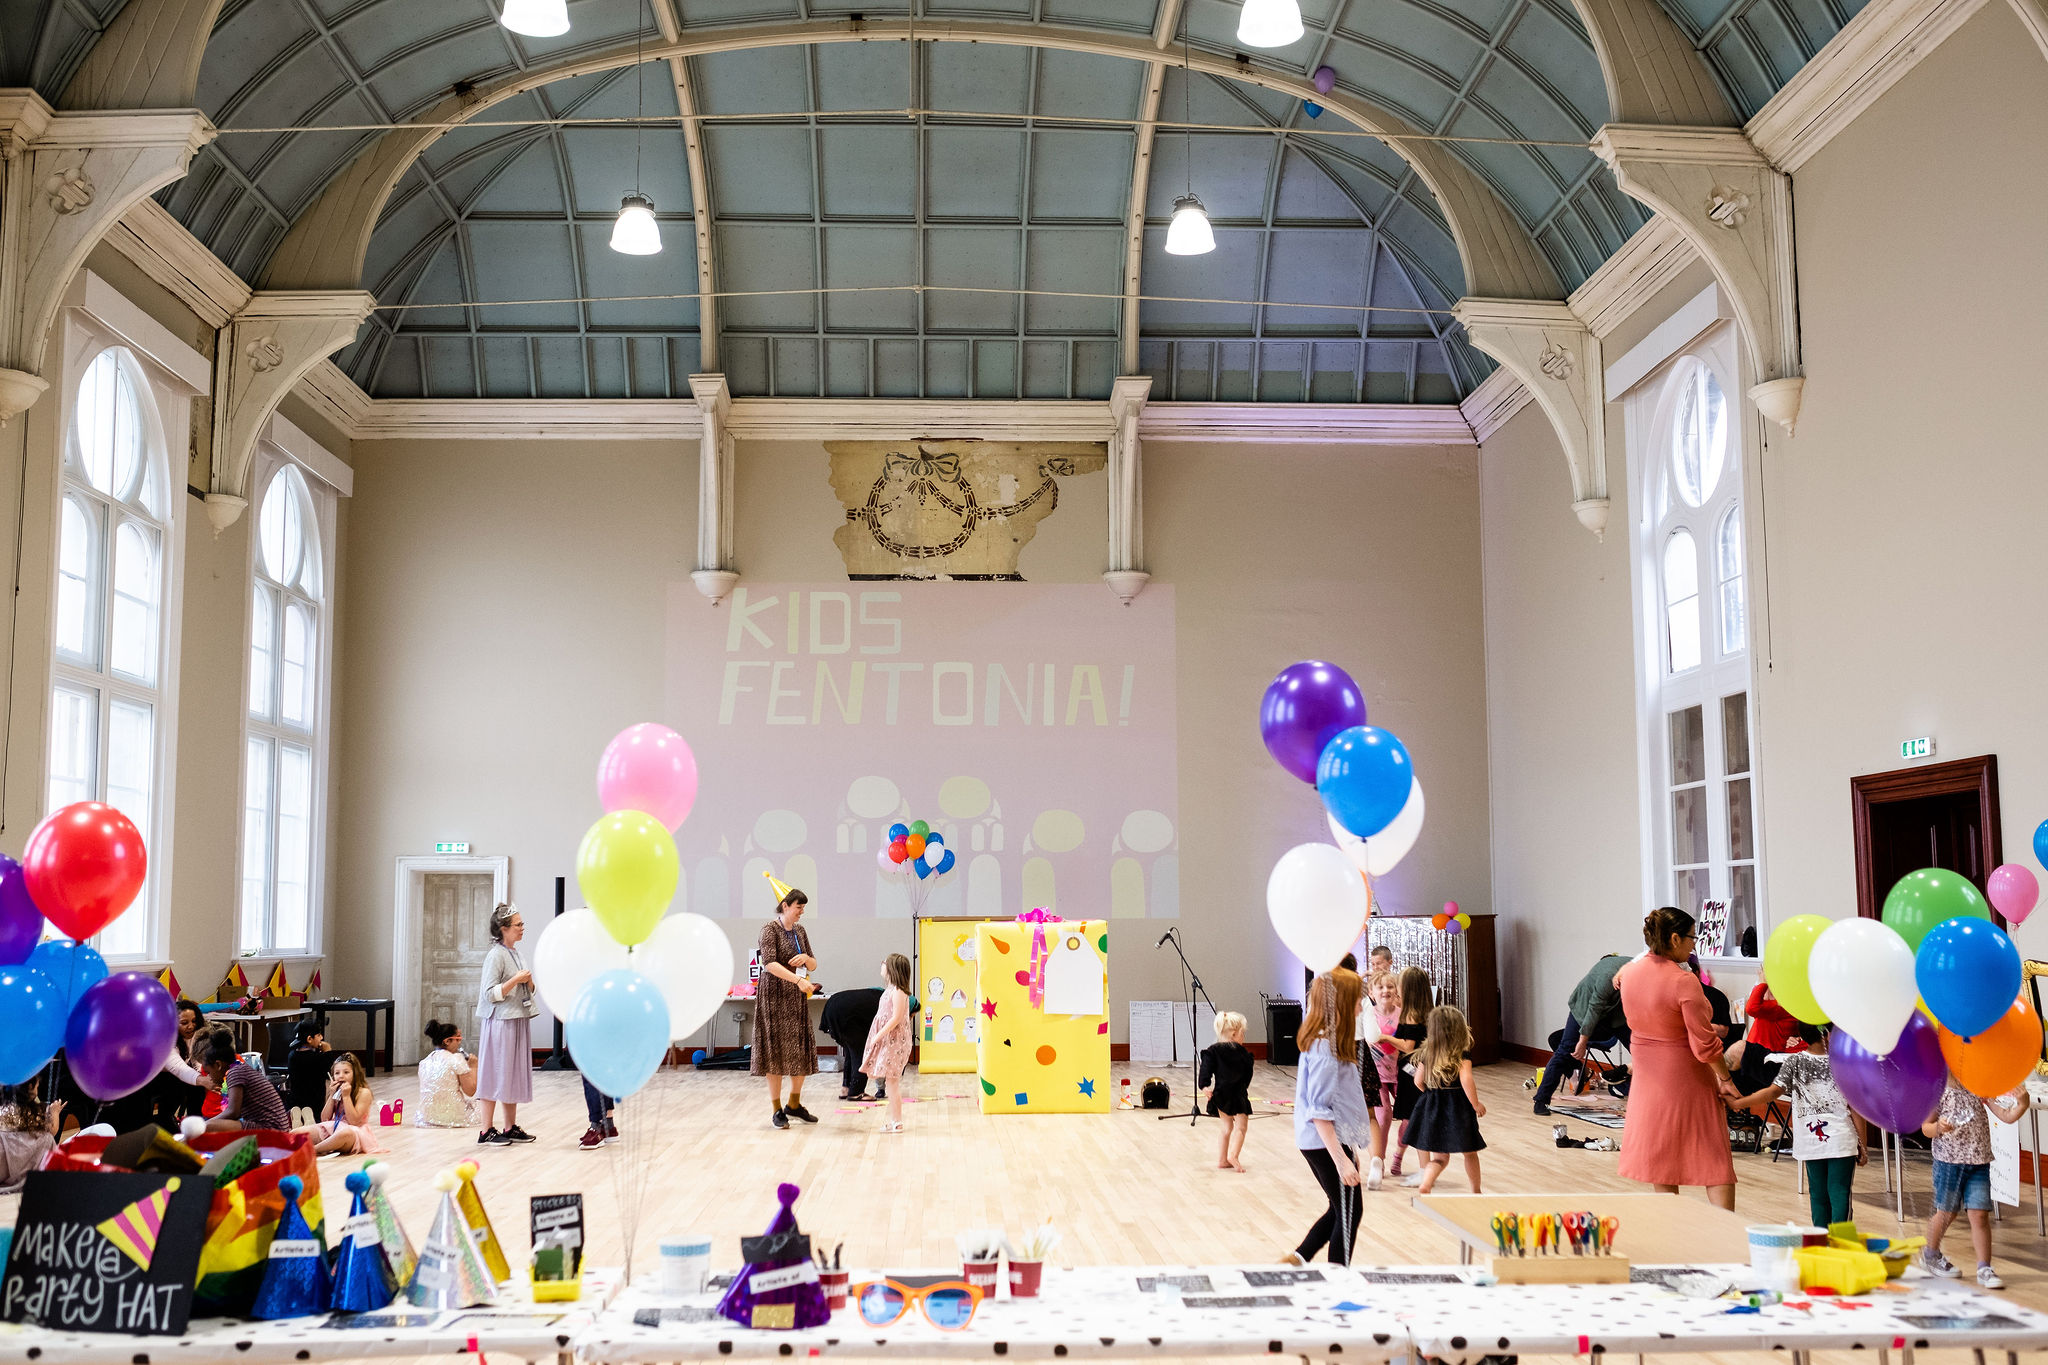 Children play in a large room with vaulted ceiling, wearing colourful party hats and surrounded by balloons. 